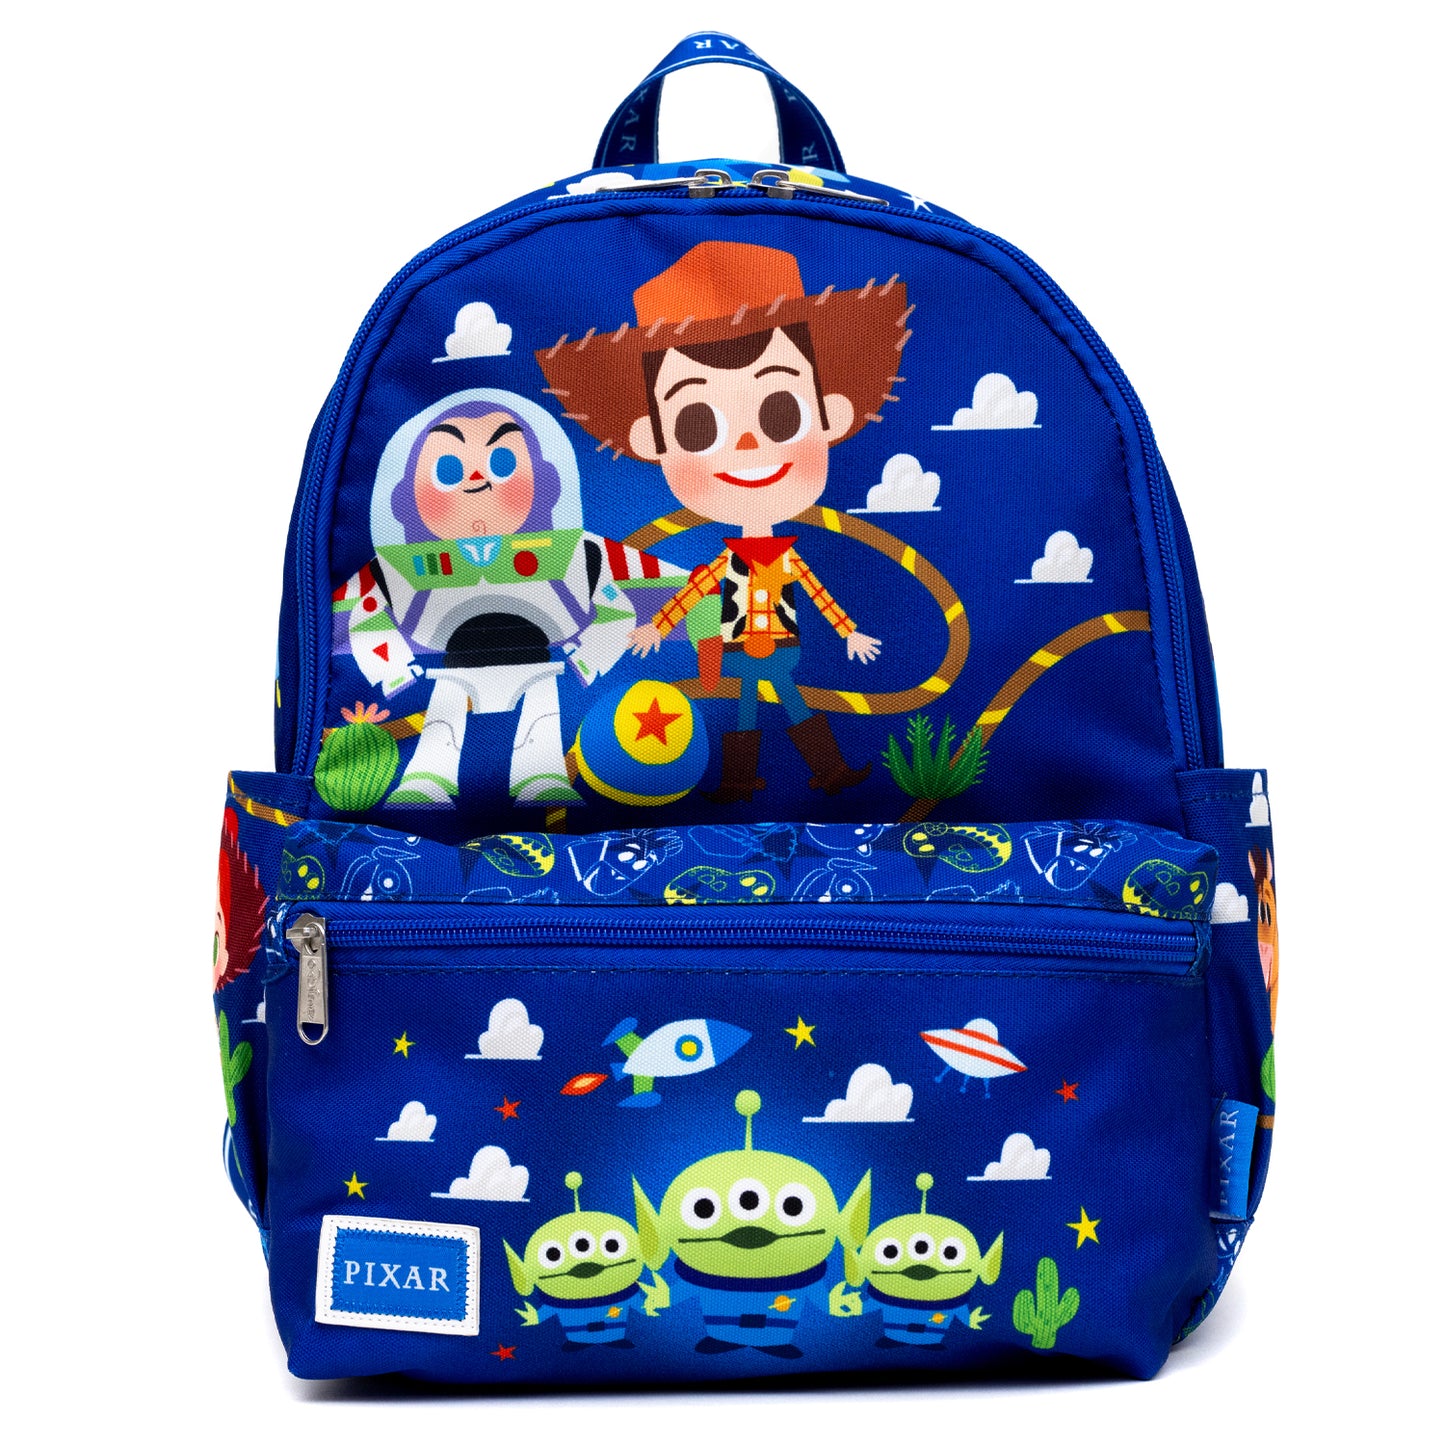 Disney Pixar Mini Backpack for Boys Girls Toddlers Kids ~ Premium 11 Backpack Bundle Featuring Toy Story, Disney Cars, Finding Nemo, Inside Out, and